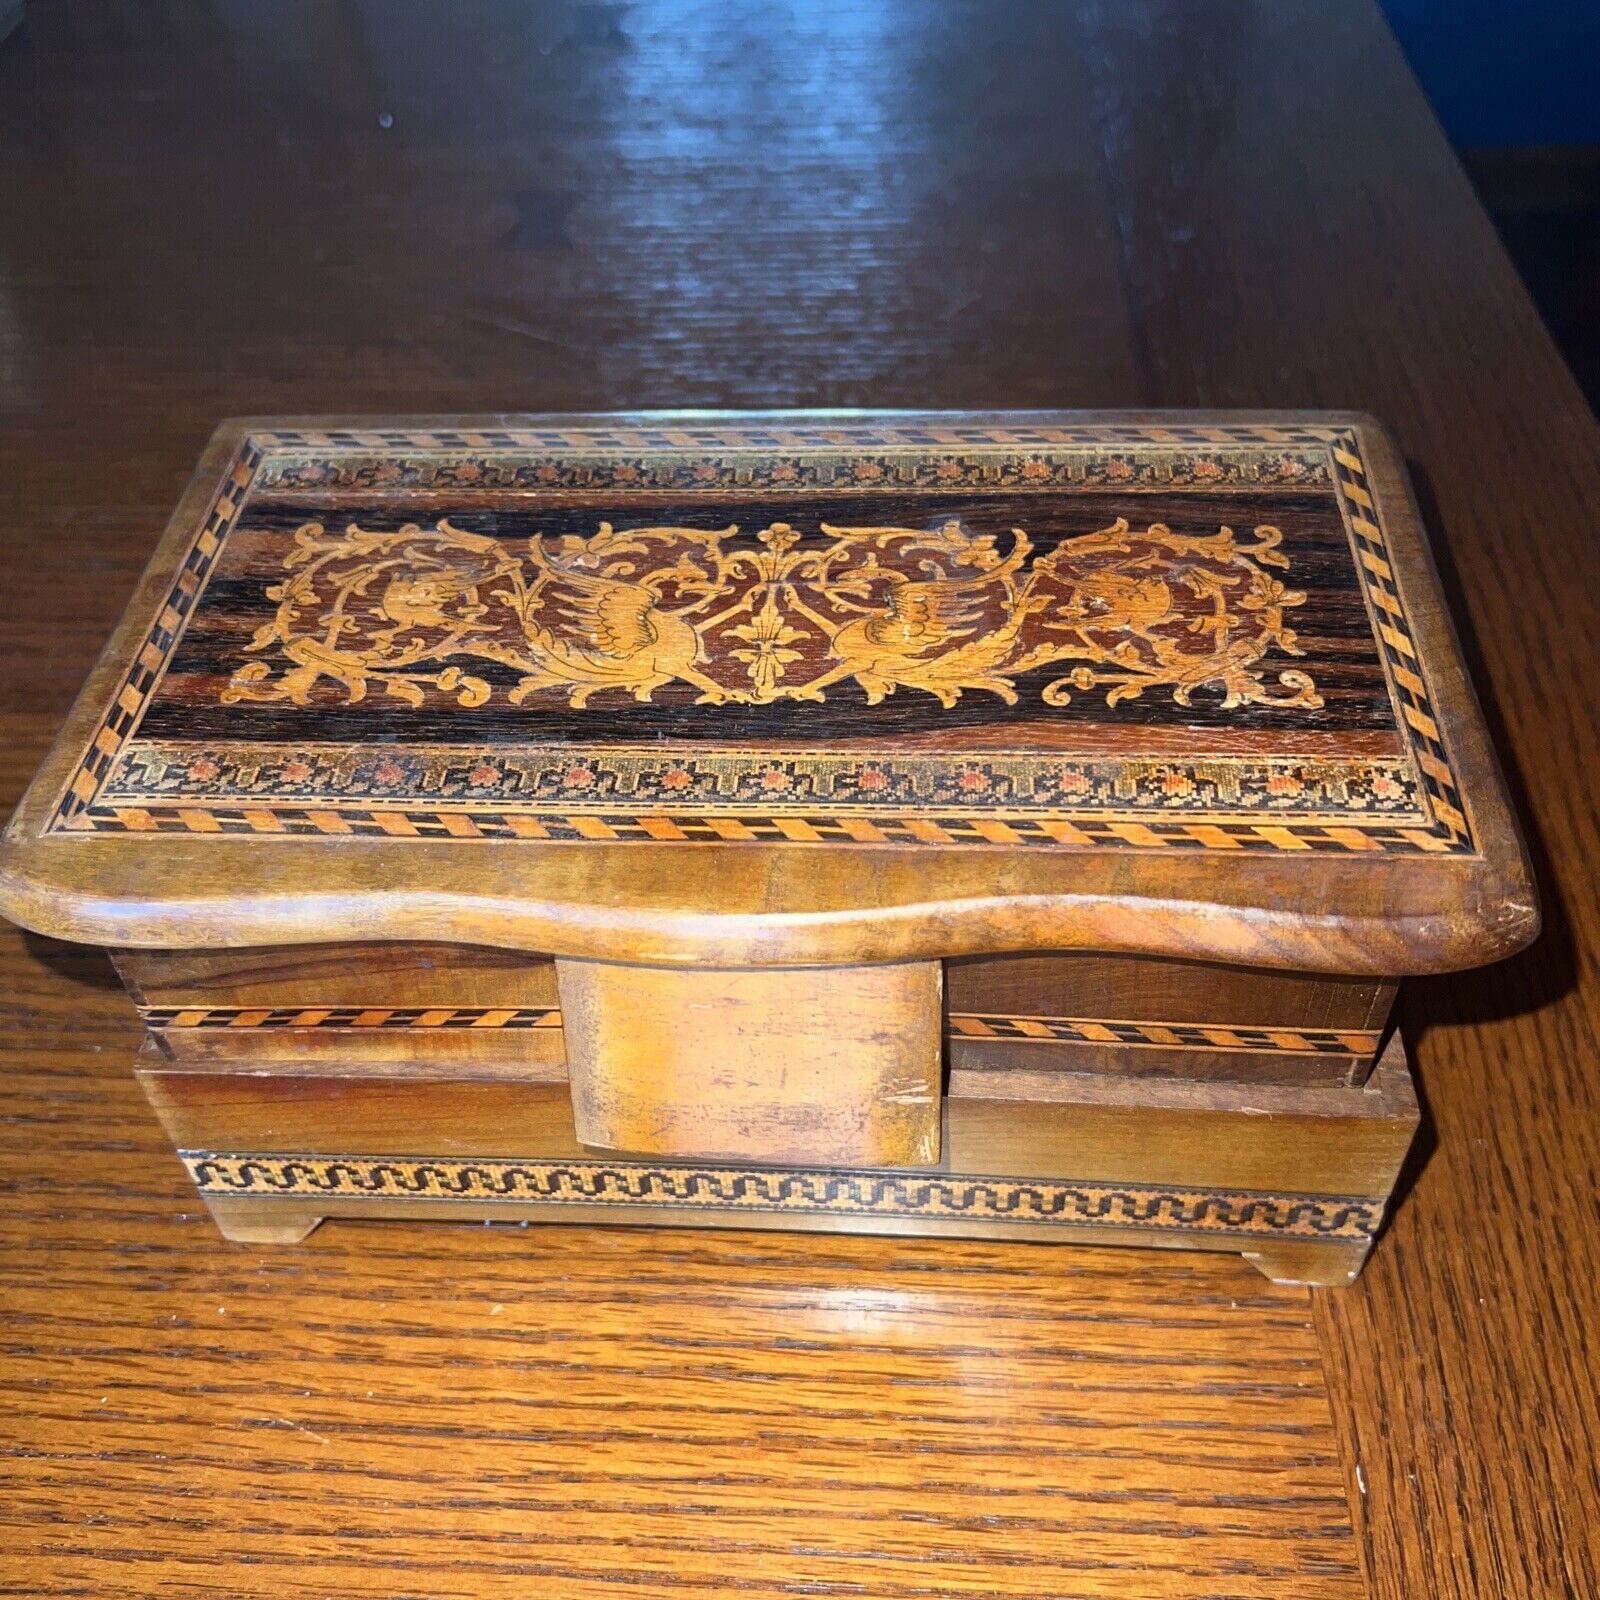 Antique Ricordo Of Napoli jewelry box with inlaid marquetry